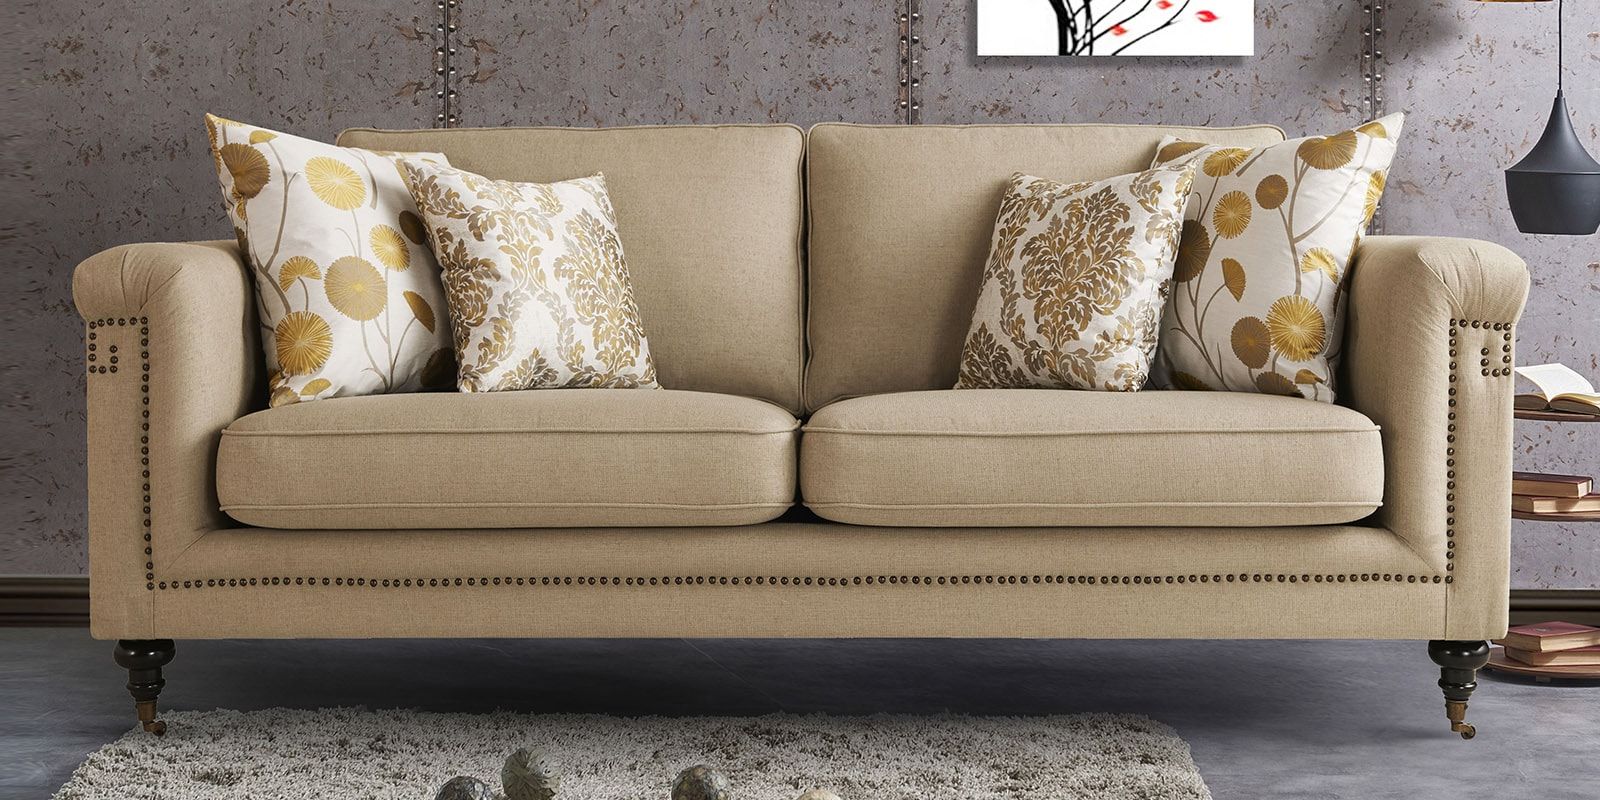 Modern 3 Seater Sofas Pertaining To Popular Buy Ankara 3 Seater Sofa In Beige Coloururban Living Online (View 6 of 15)